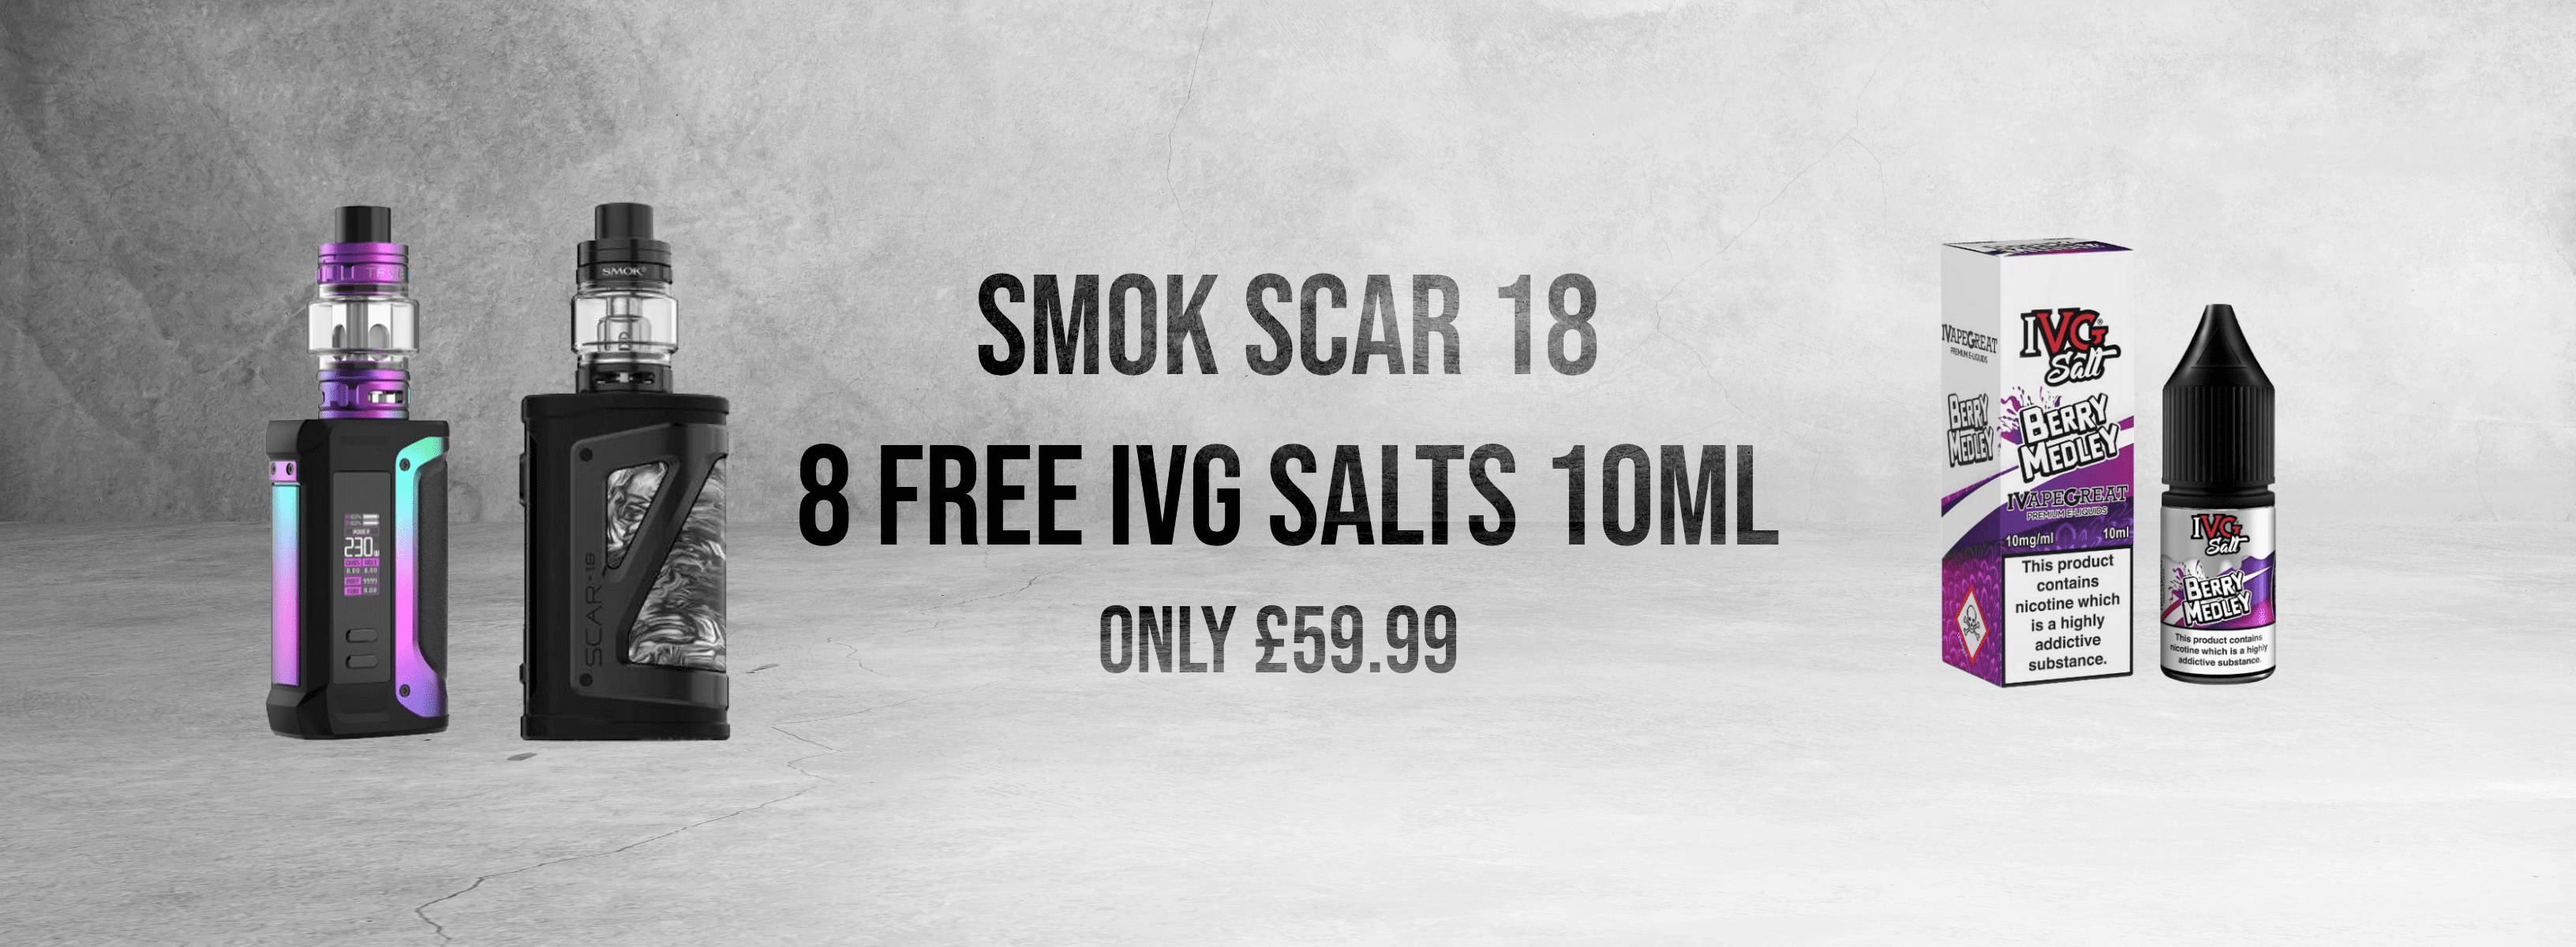 Advert for an offer on SMOK and IVG Nic Salts products